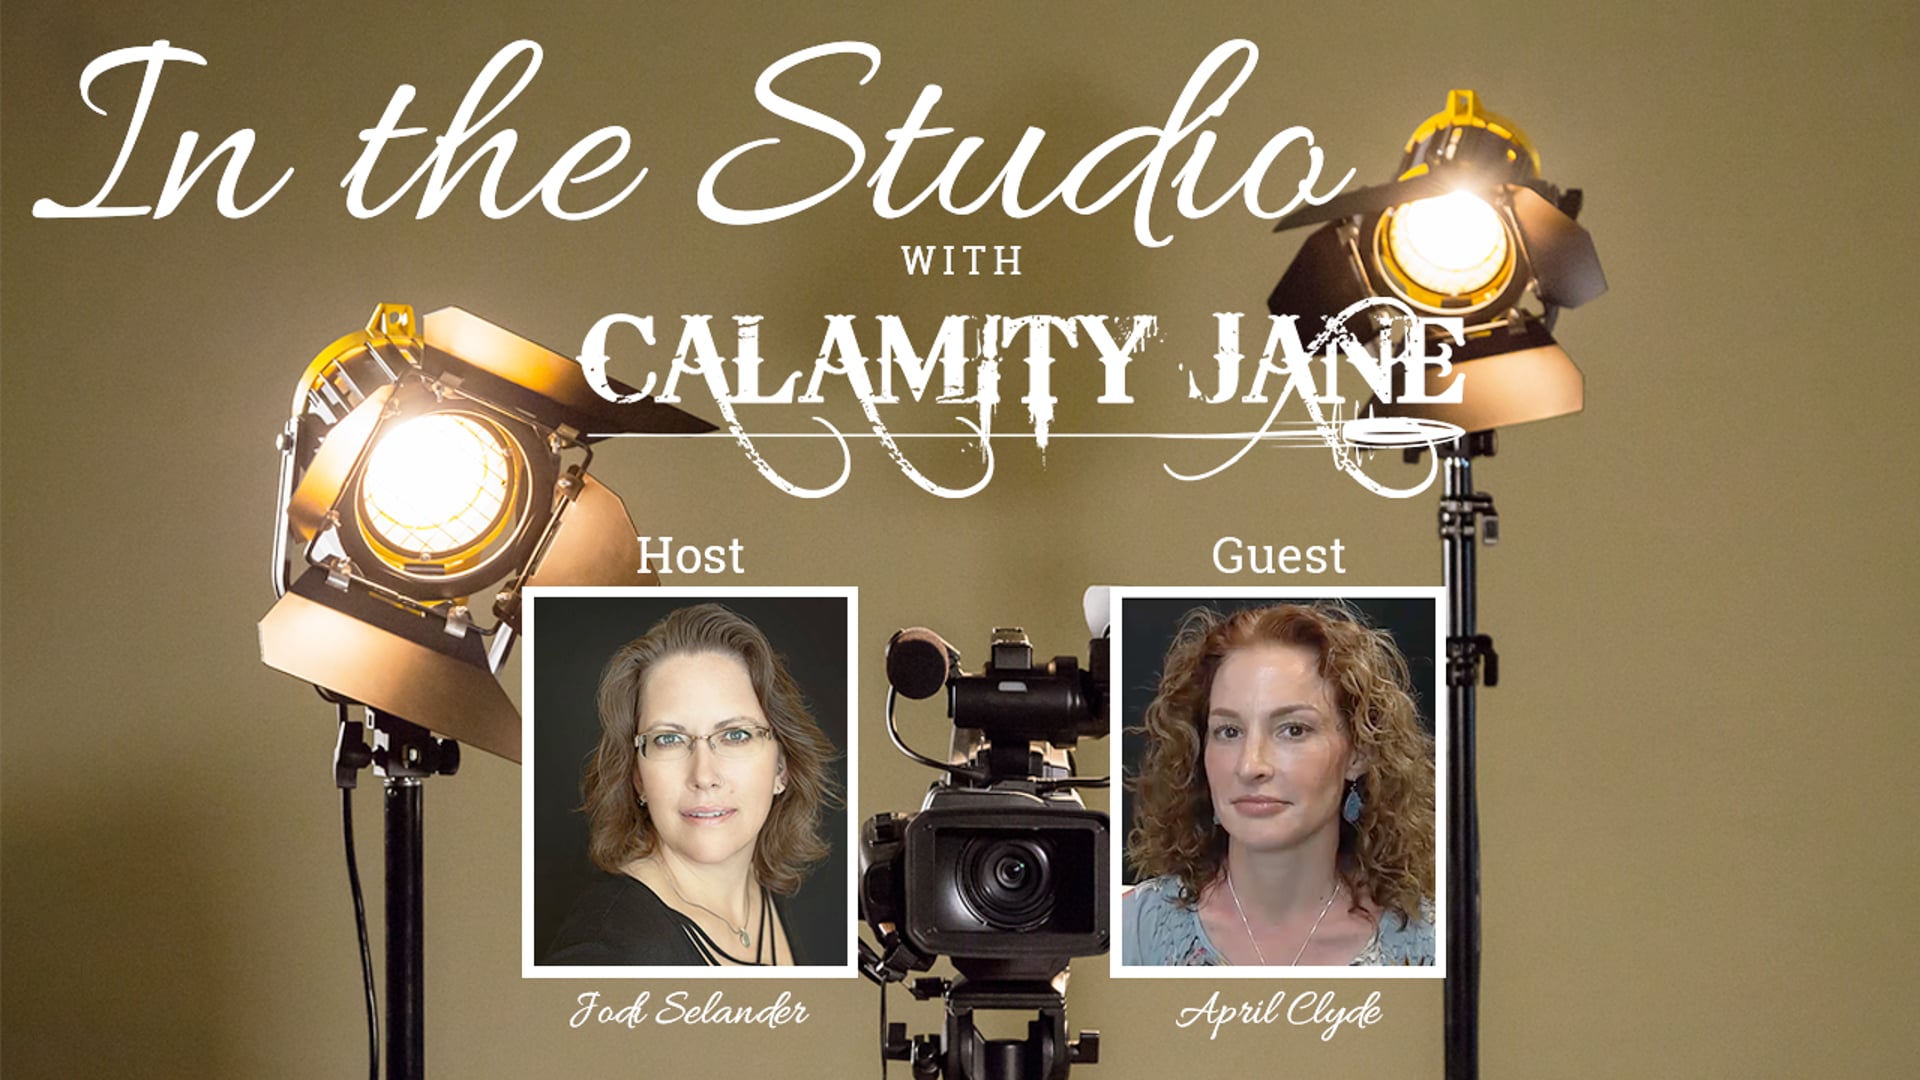 S1:E18 - April Clyde is In The Studio with Calamity Jane